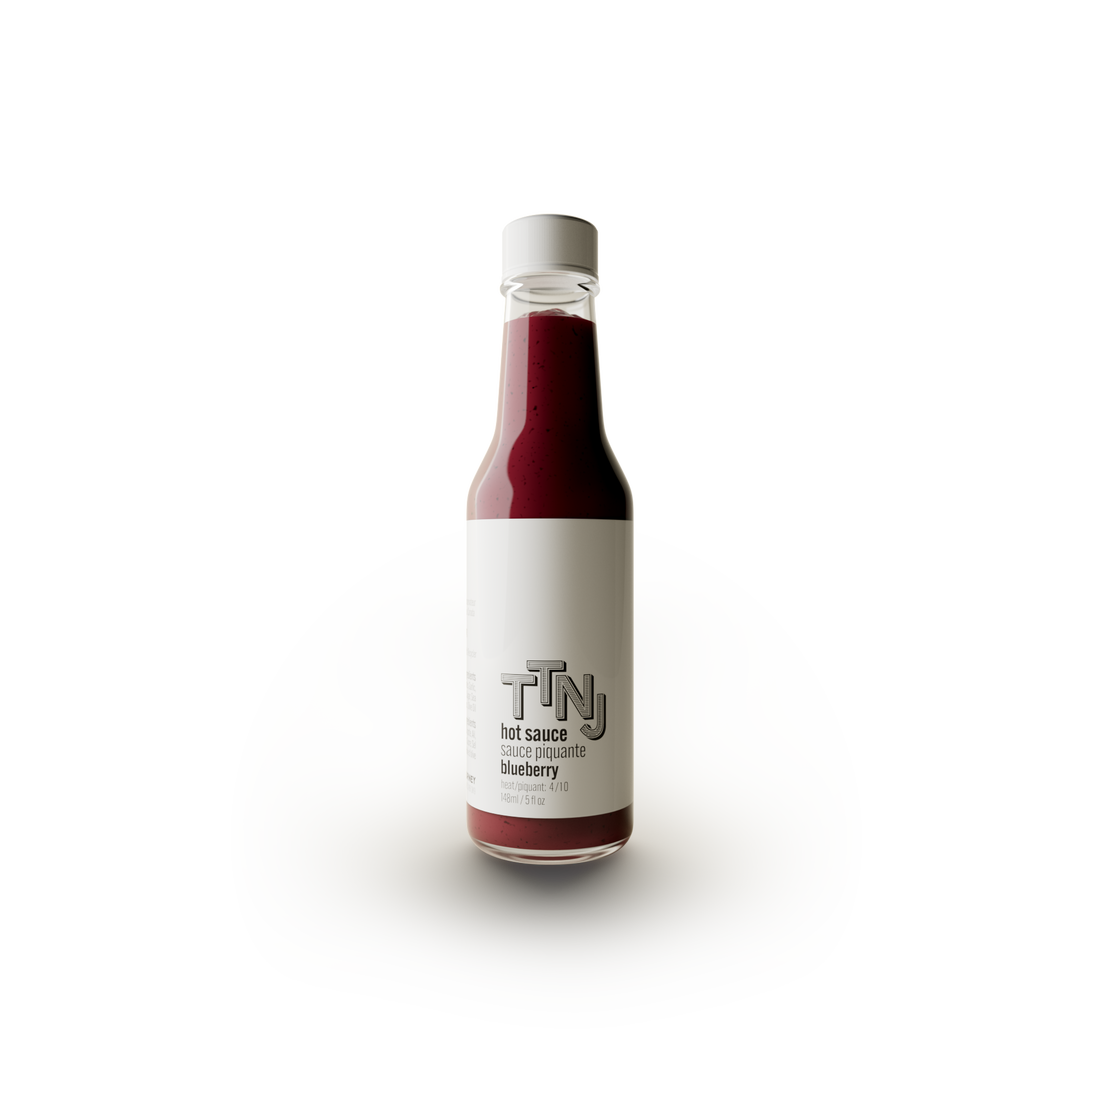 blueberry hot sauce in glass bottle and white label